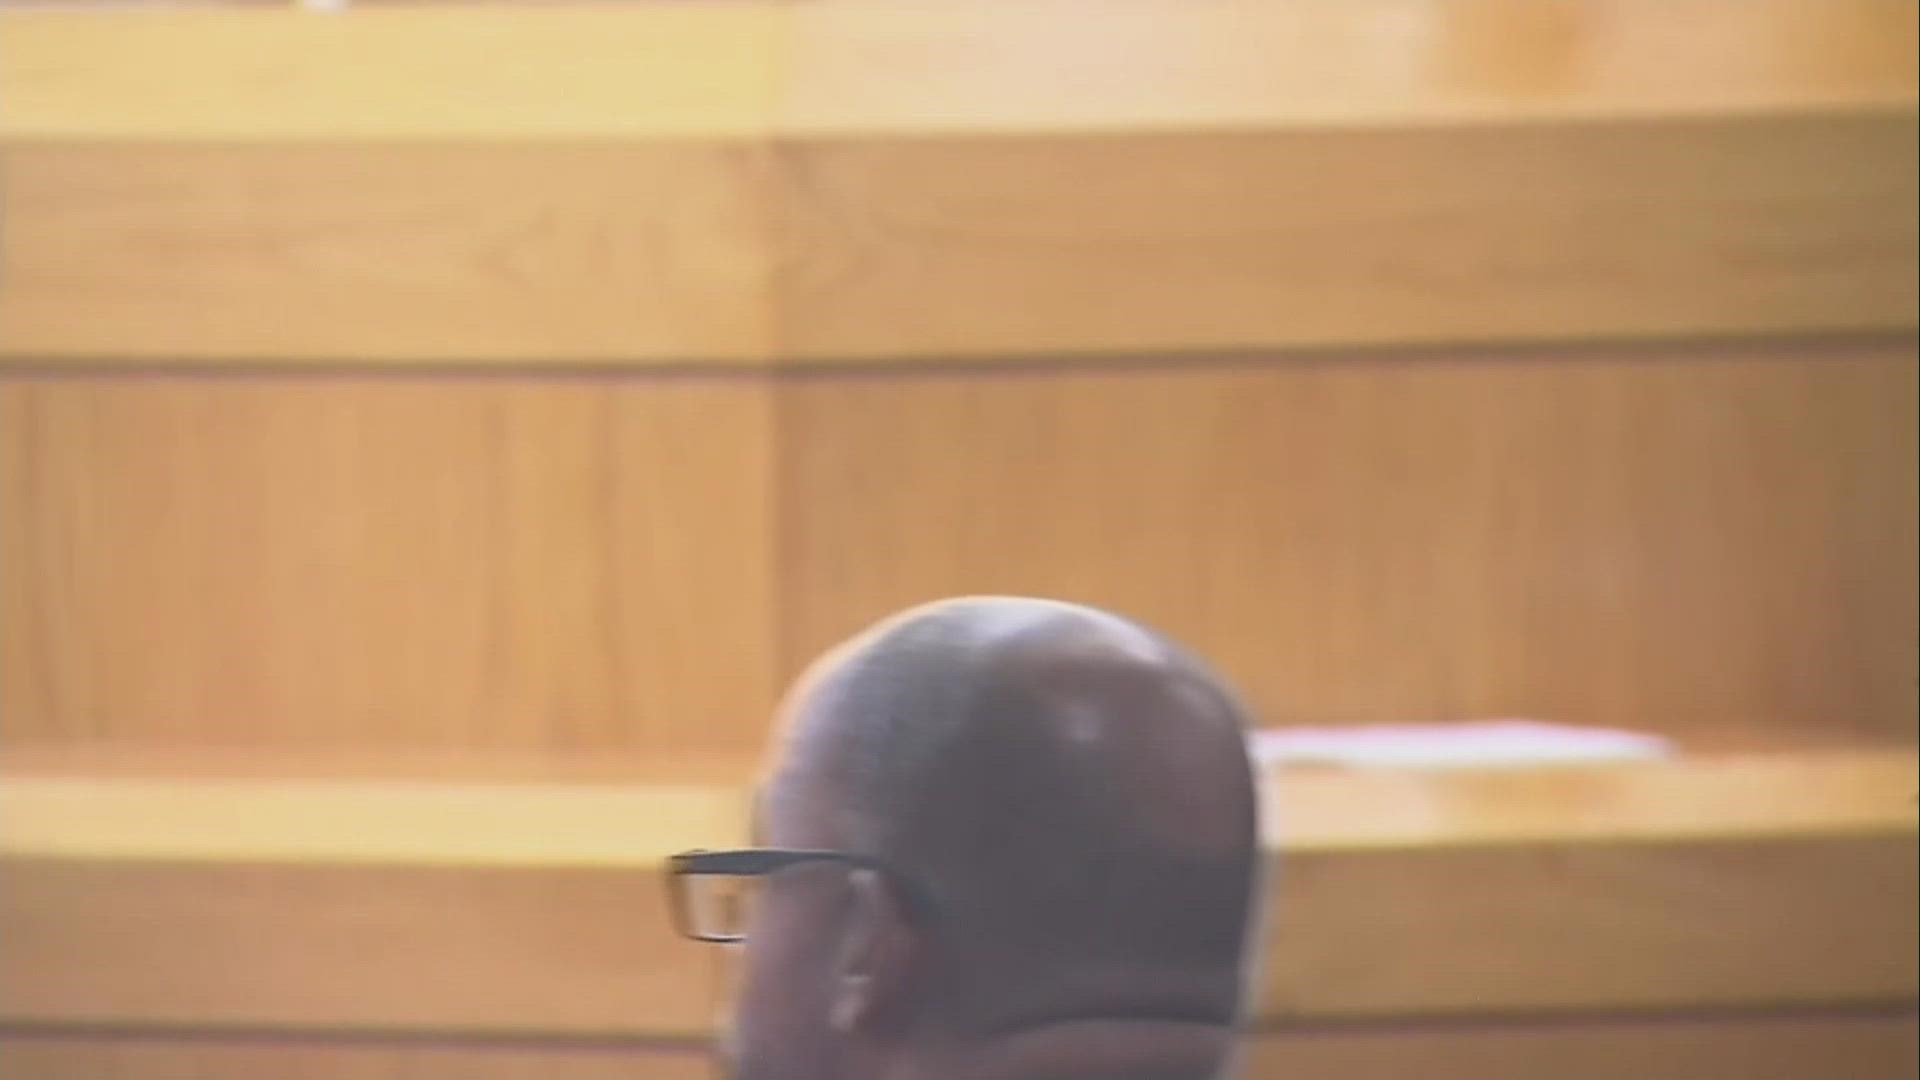 A jury found Darius Fields guilty of organized criminal activity after a few hours of deliberation Tuesday, March 7.